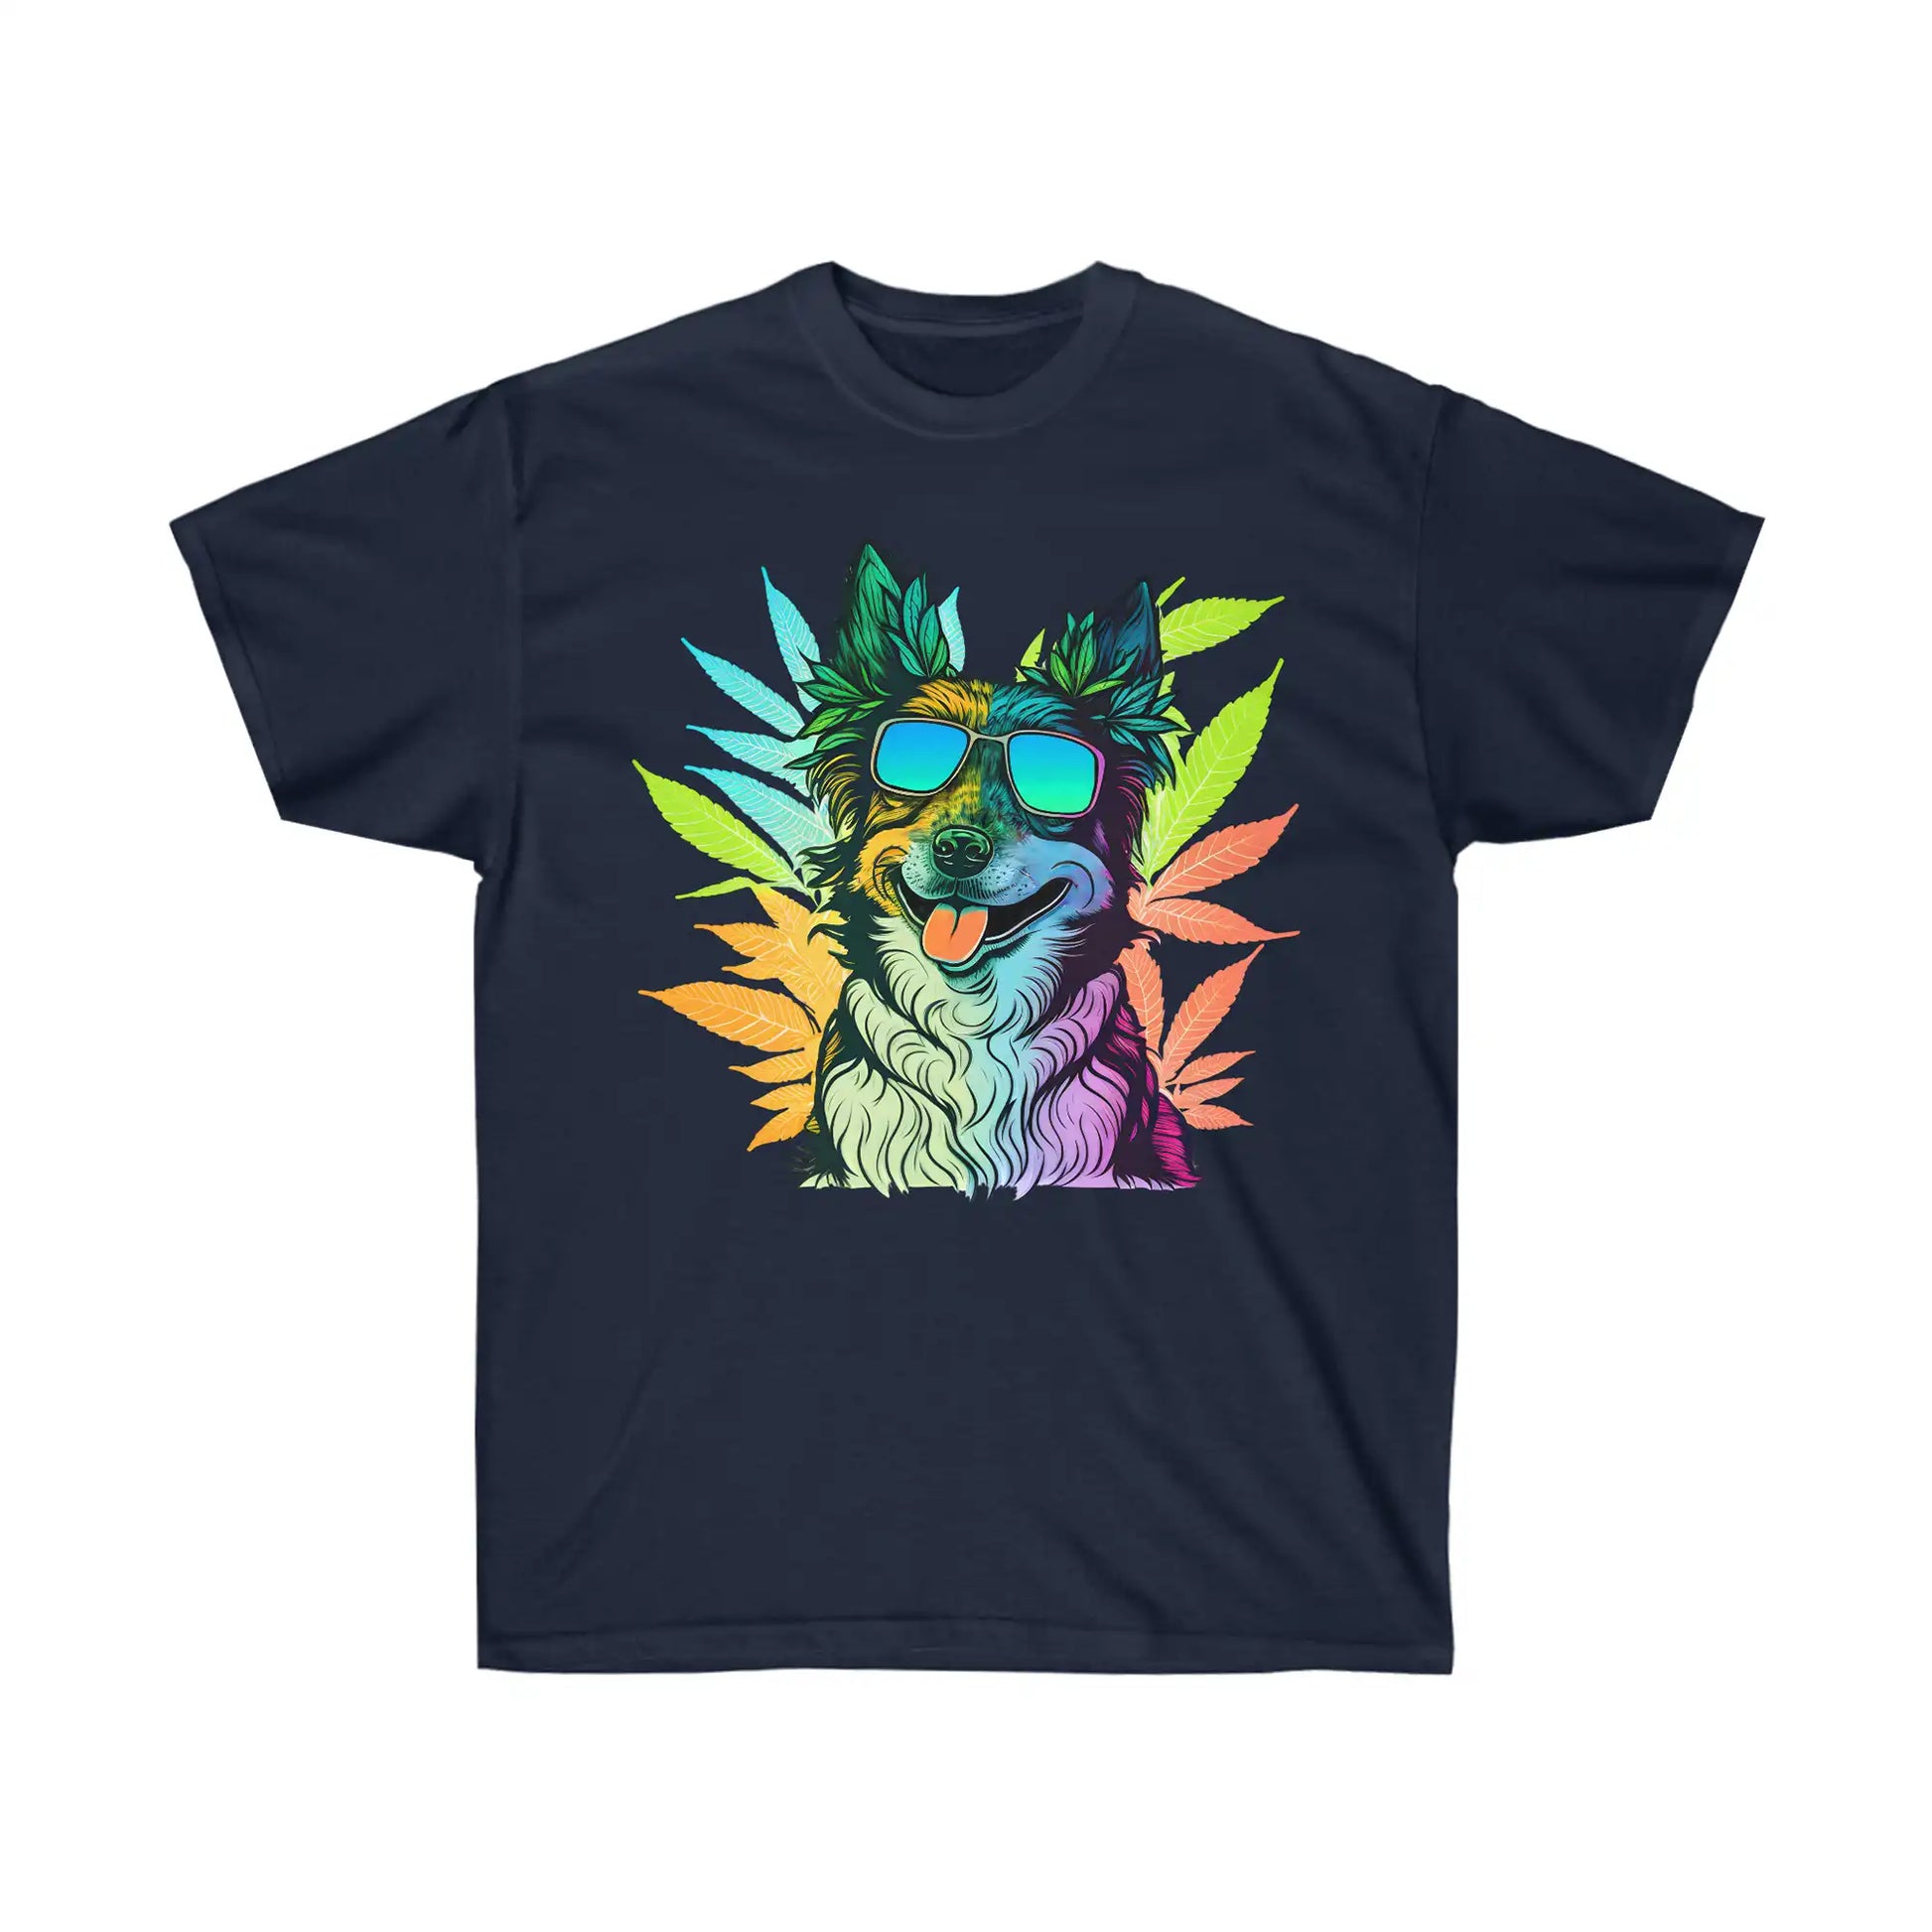 Cool Border Collie with shades surrounded by cannabis on a Navy weed tshirt